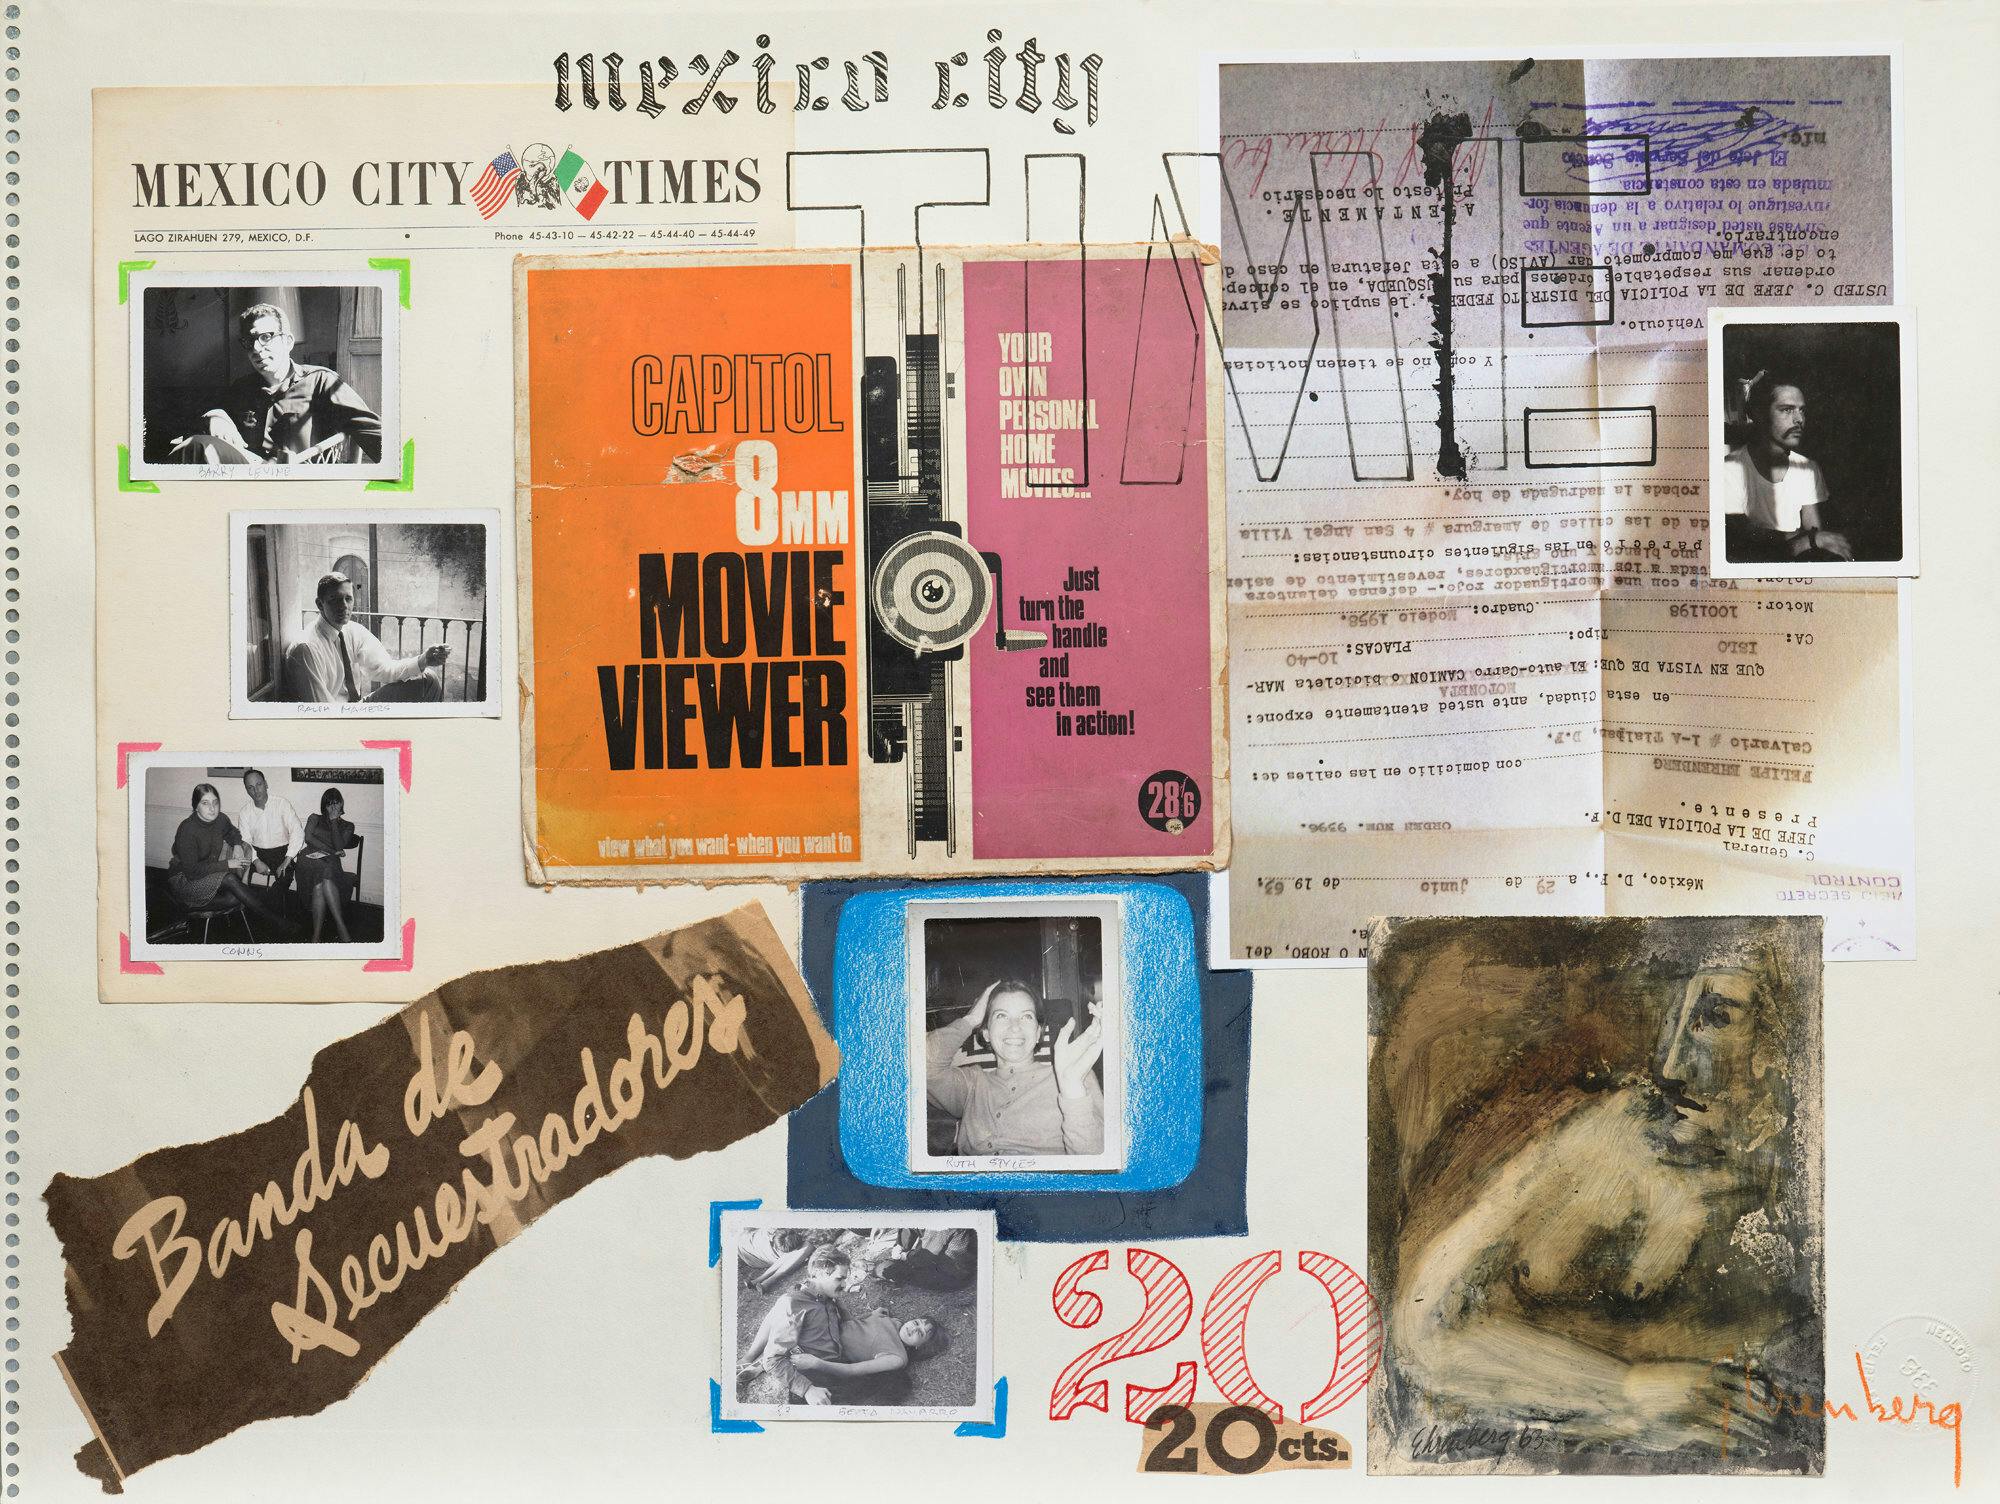 A collage showing fragments newspaper and magazine clippings, overlaid with stenciled text.